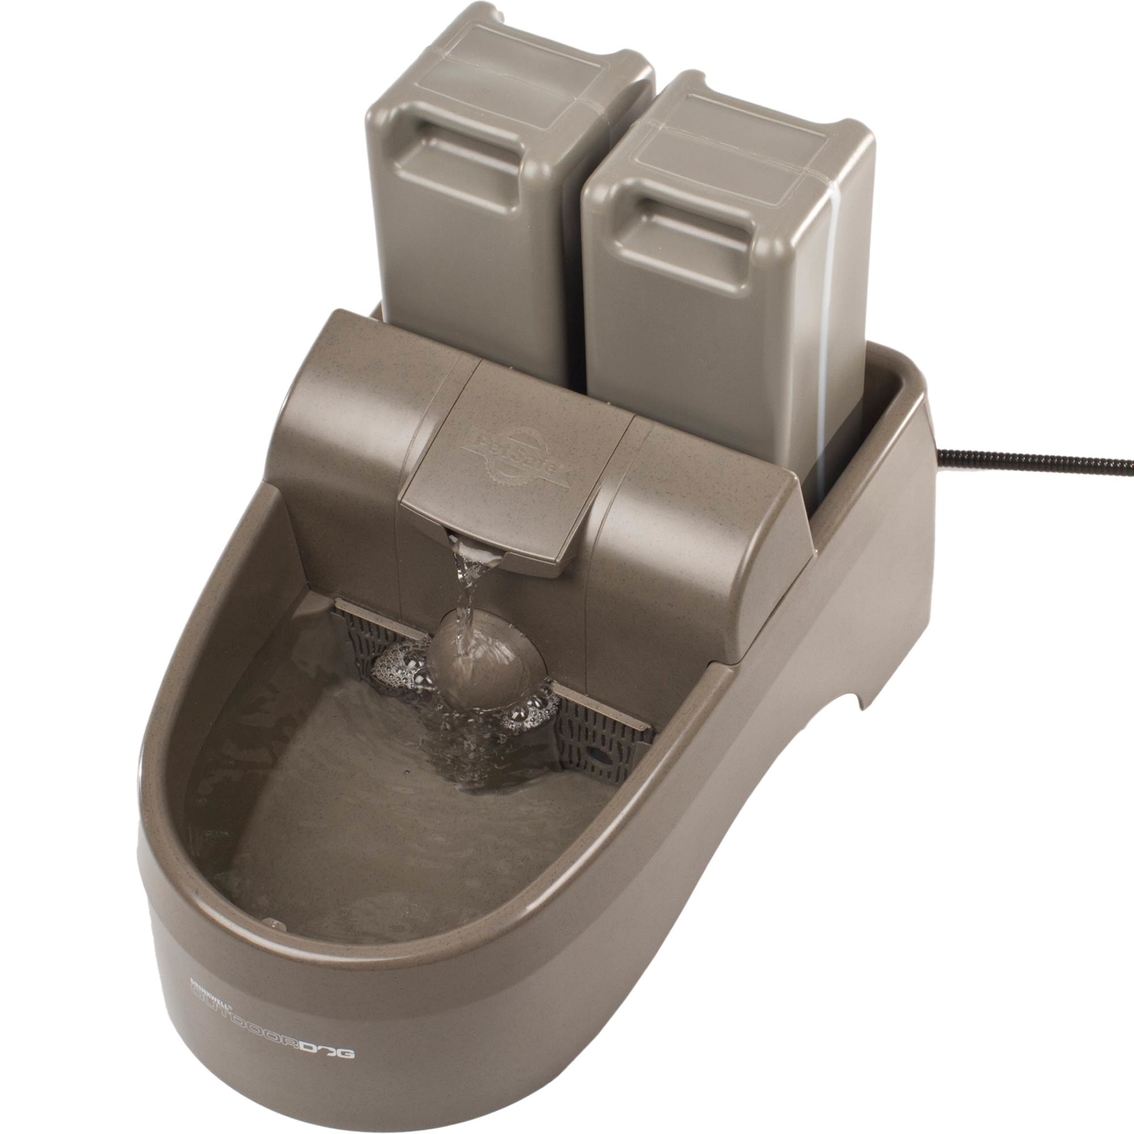 Petsafe Drinkwell Outdoor Dog Fountain, Drinkwell Outdoor Pet Fountain